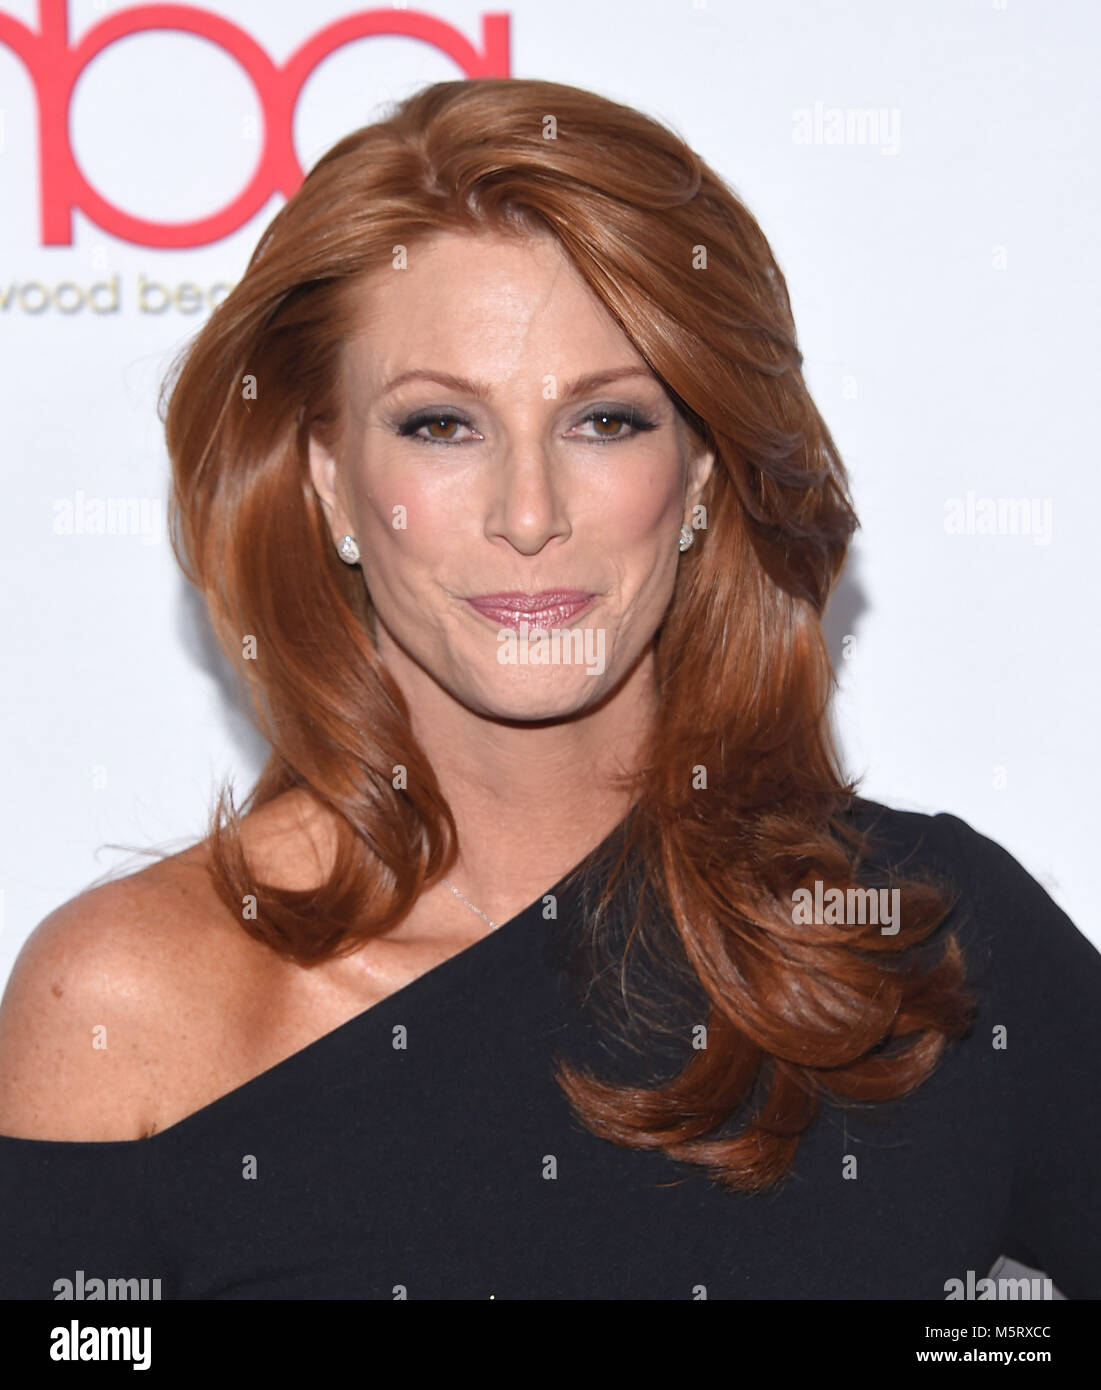 Hollywood, California, USA. 25th Feb, 2018. Angie Everhart arrives for the Hollywood Beauty Awards at Avalon Hollywood. Credit: Lisa O'Connor/ZUMA Wire/Alamy Live News Stock Photo